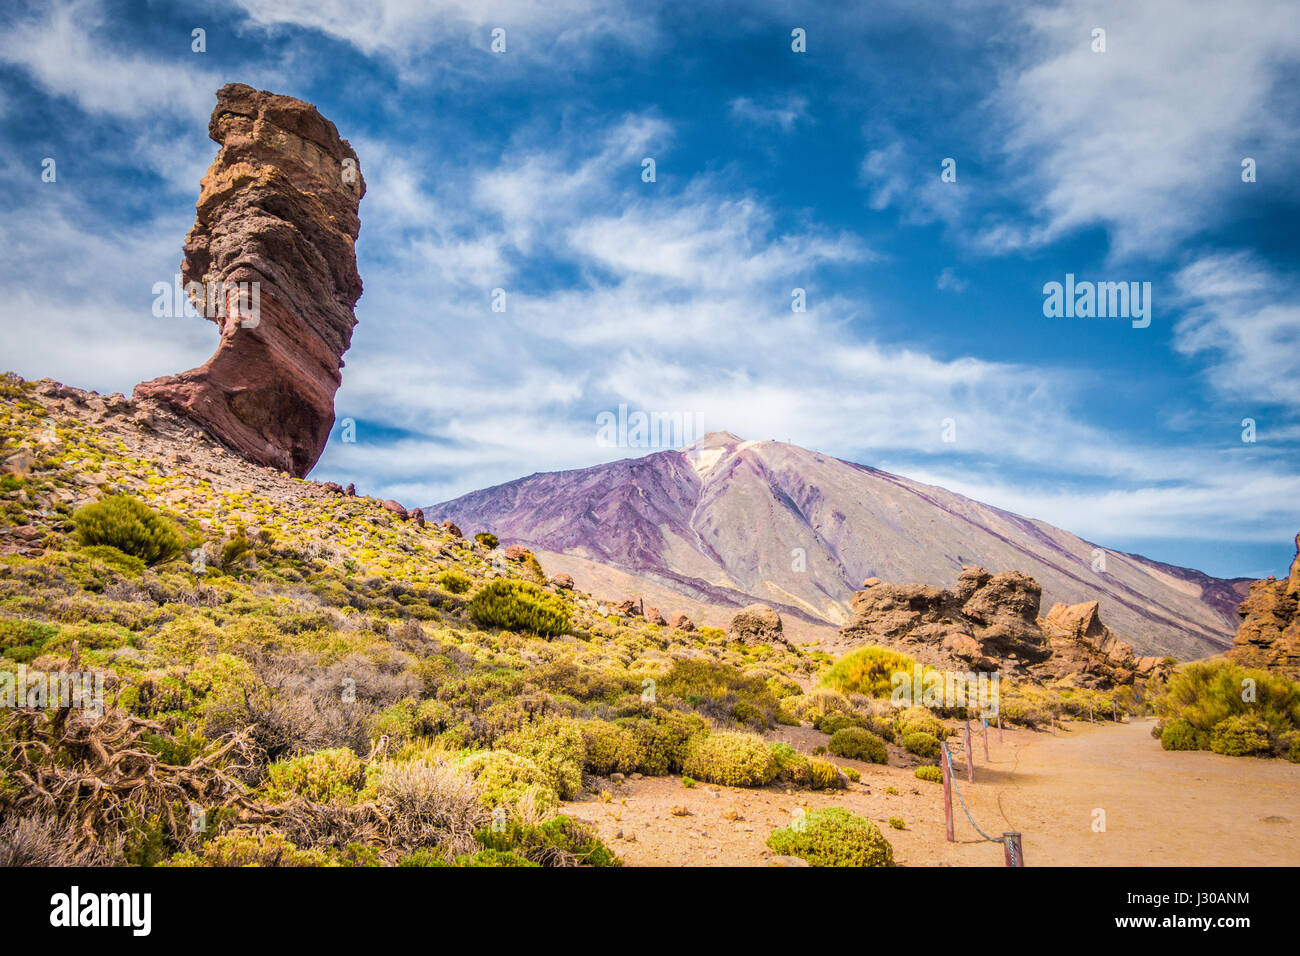 Roque Cinchado unique rock formation with famous Pico del Teide mountain volcano summit in the background on a sunny day, Tenerife, Canaries, Spain Stock Photo